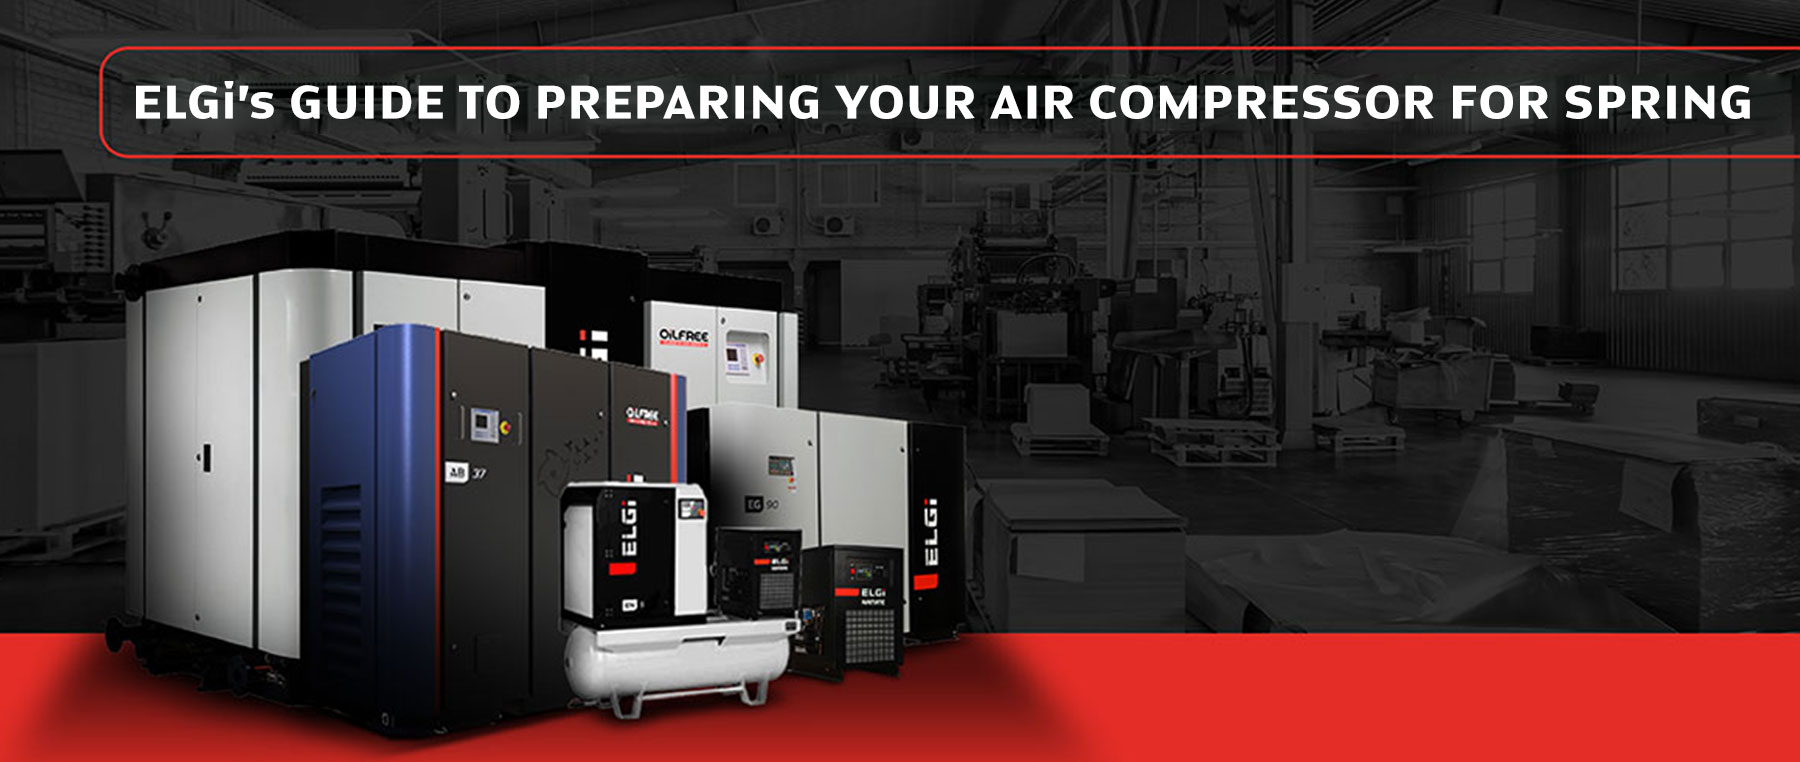 ELGi’s GUIDE TO PREPARING YOUR AIR COMPRESSOR FOR SPRING